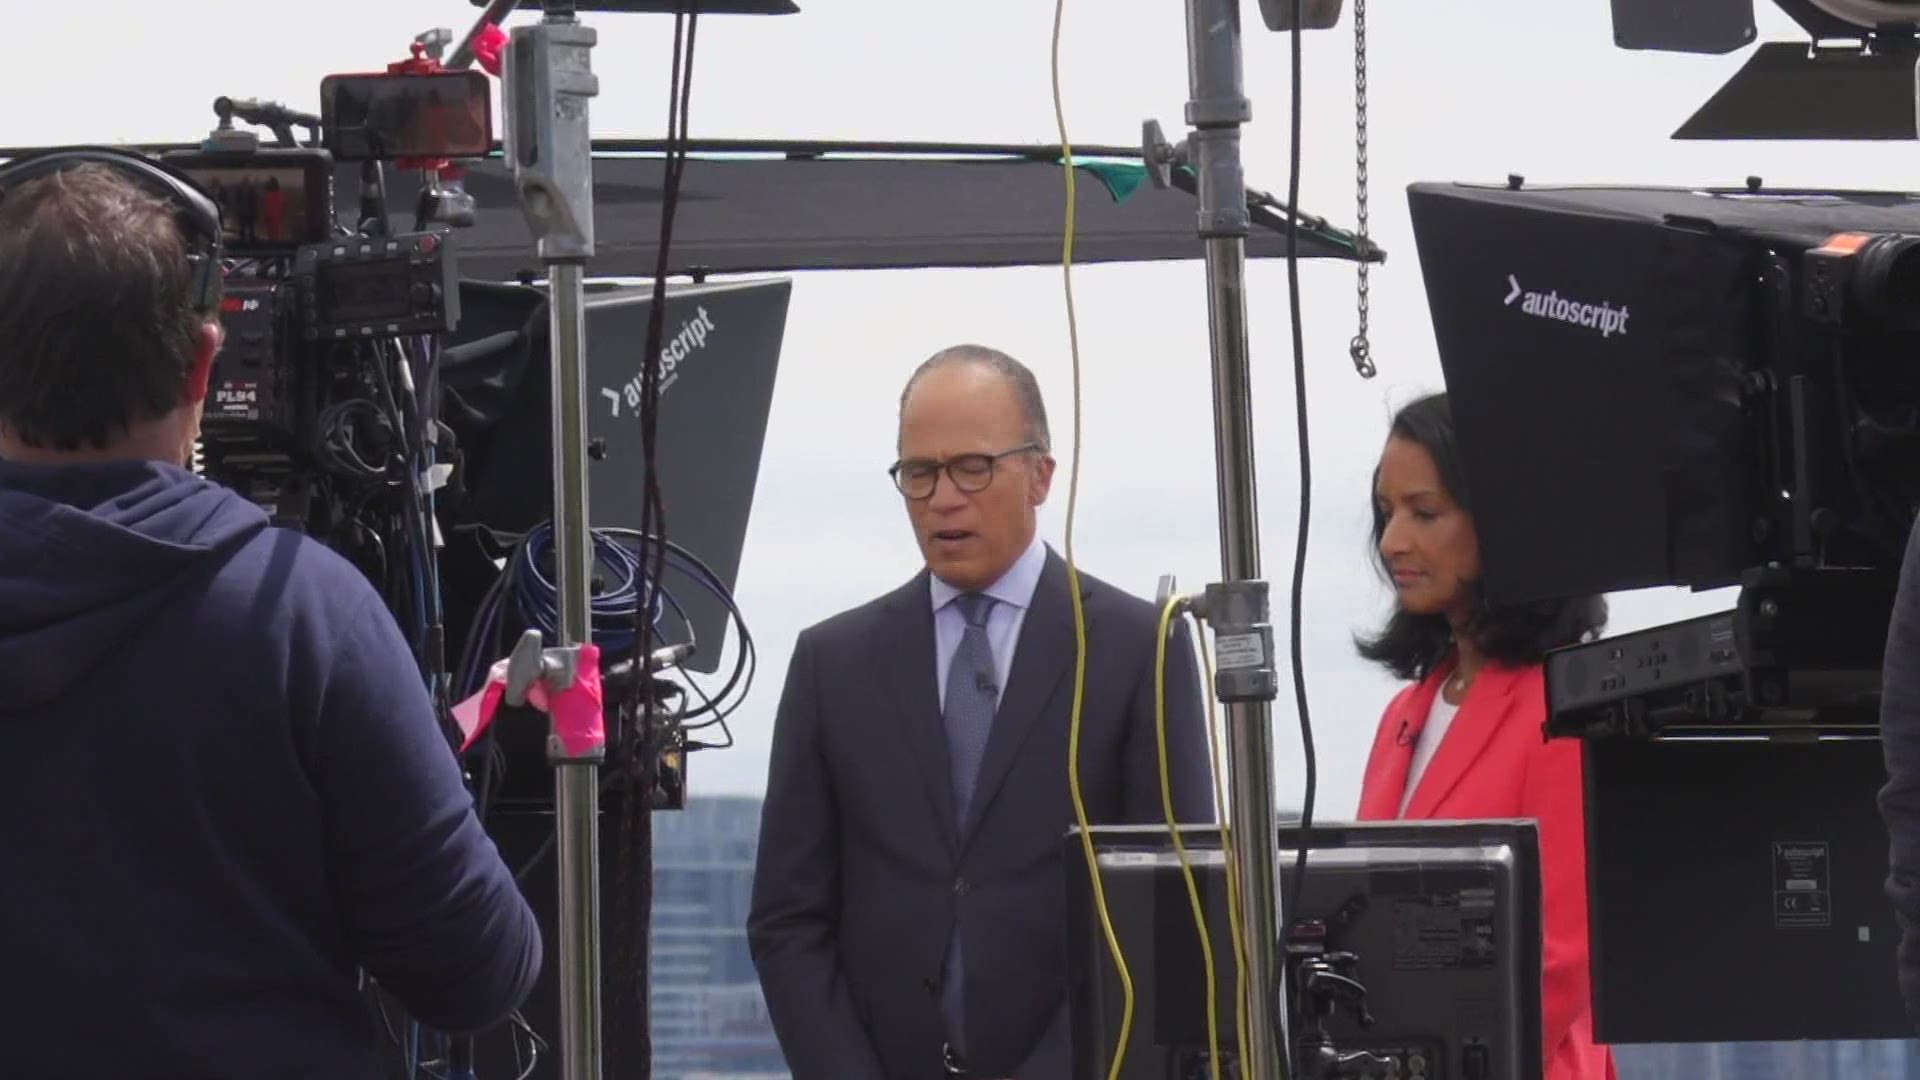 KING 5's Chris Cashman caught up with NBC Nightly News host Lester Holt and his crew as they prepared to broadcast from Seattle on Thursday, May 20, 2021.